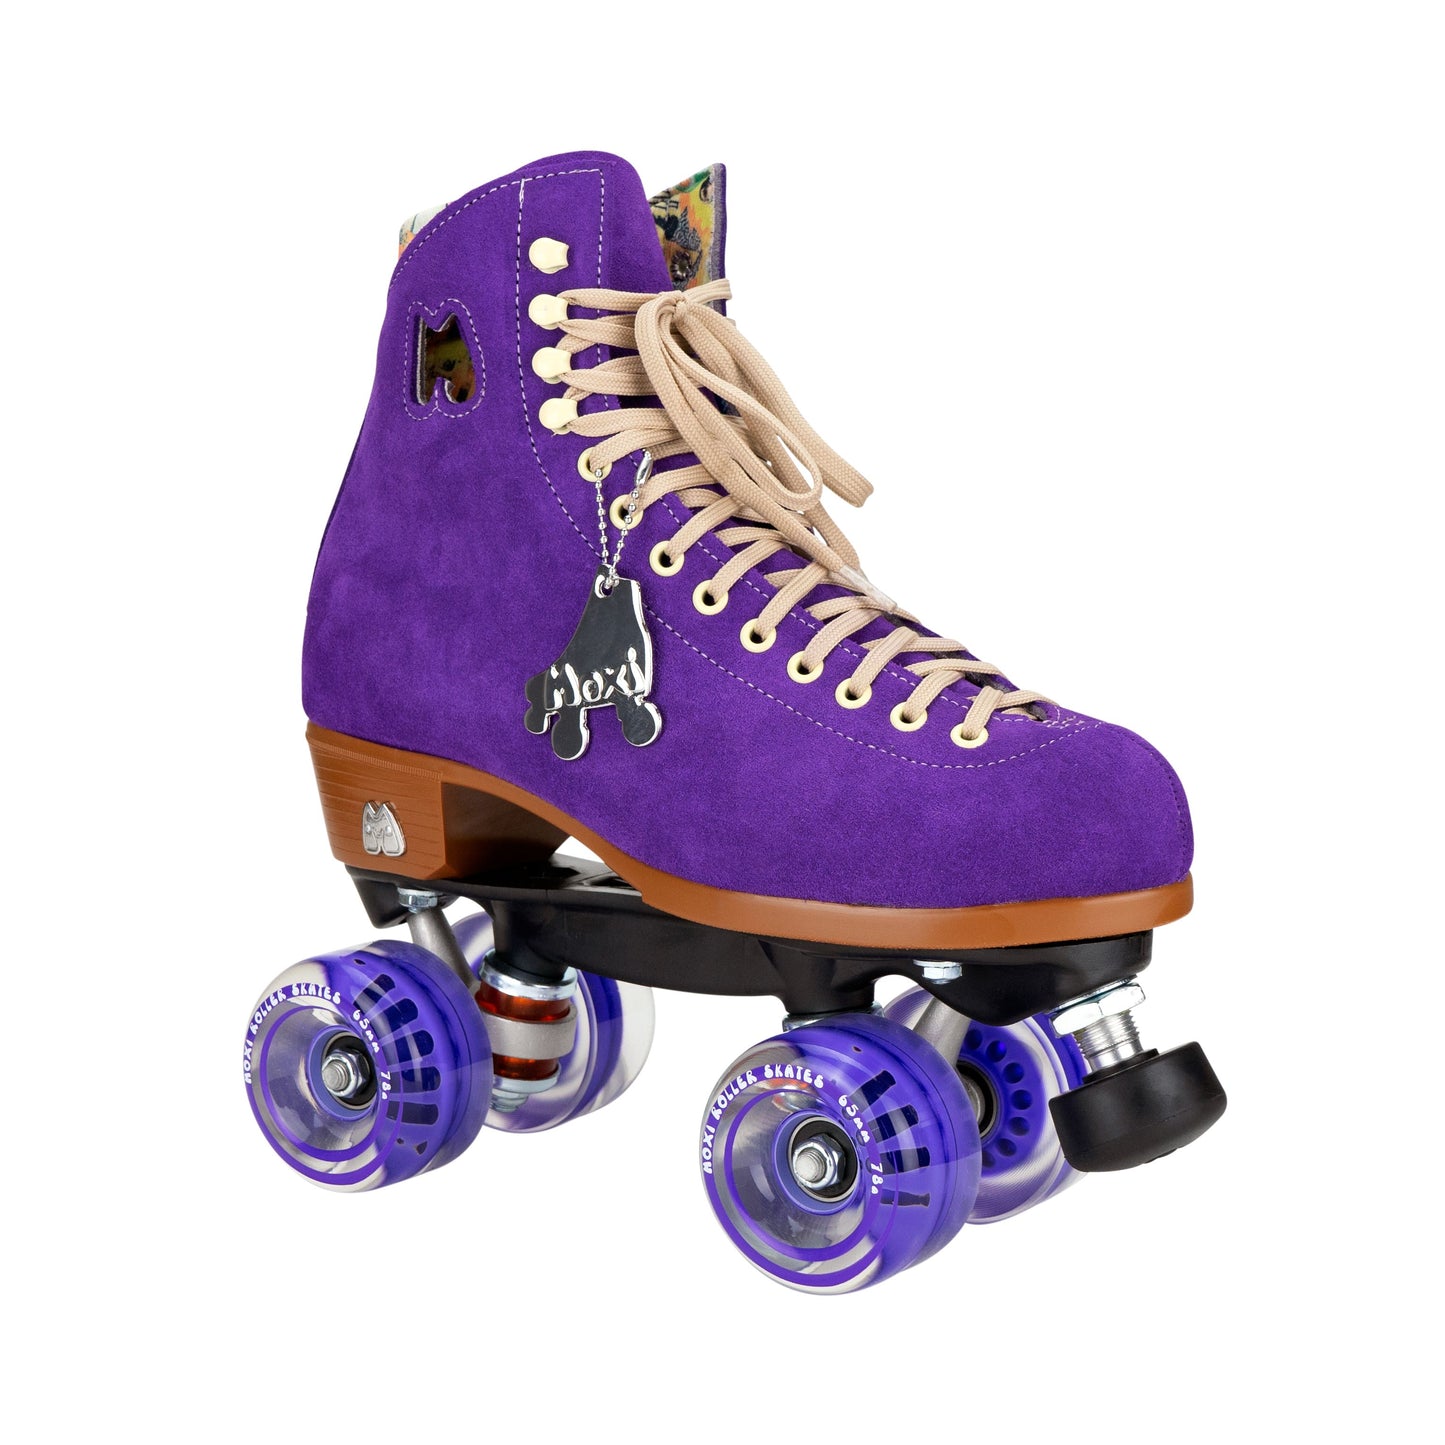 Come to Fresa's Roller Skate shop in Las Vegas and get your Moxi Lollys Skates.  These Purple Moxi Lolly Roller Skates are ready to the outdoor. Cruise around Las Vegas Art District or come and skate in our indoor skate ramp. Fresa's Roller Skate Shop the one skate shop in Las Vegas.  We build custome shoe roller skate, roller Skate Classes and Roller Blade classes.